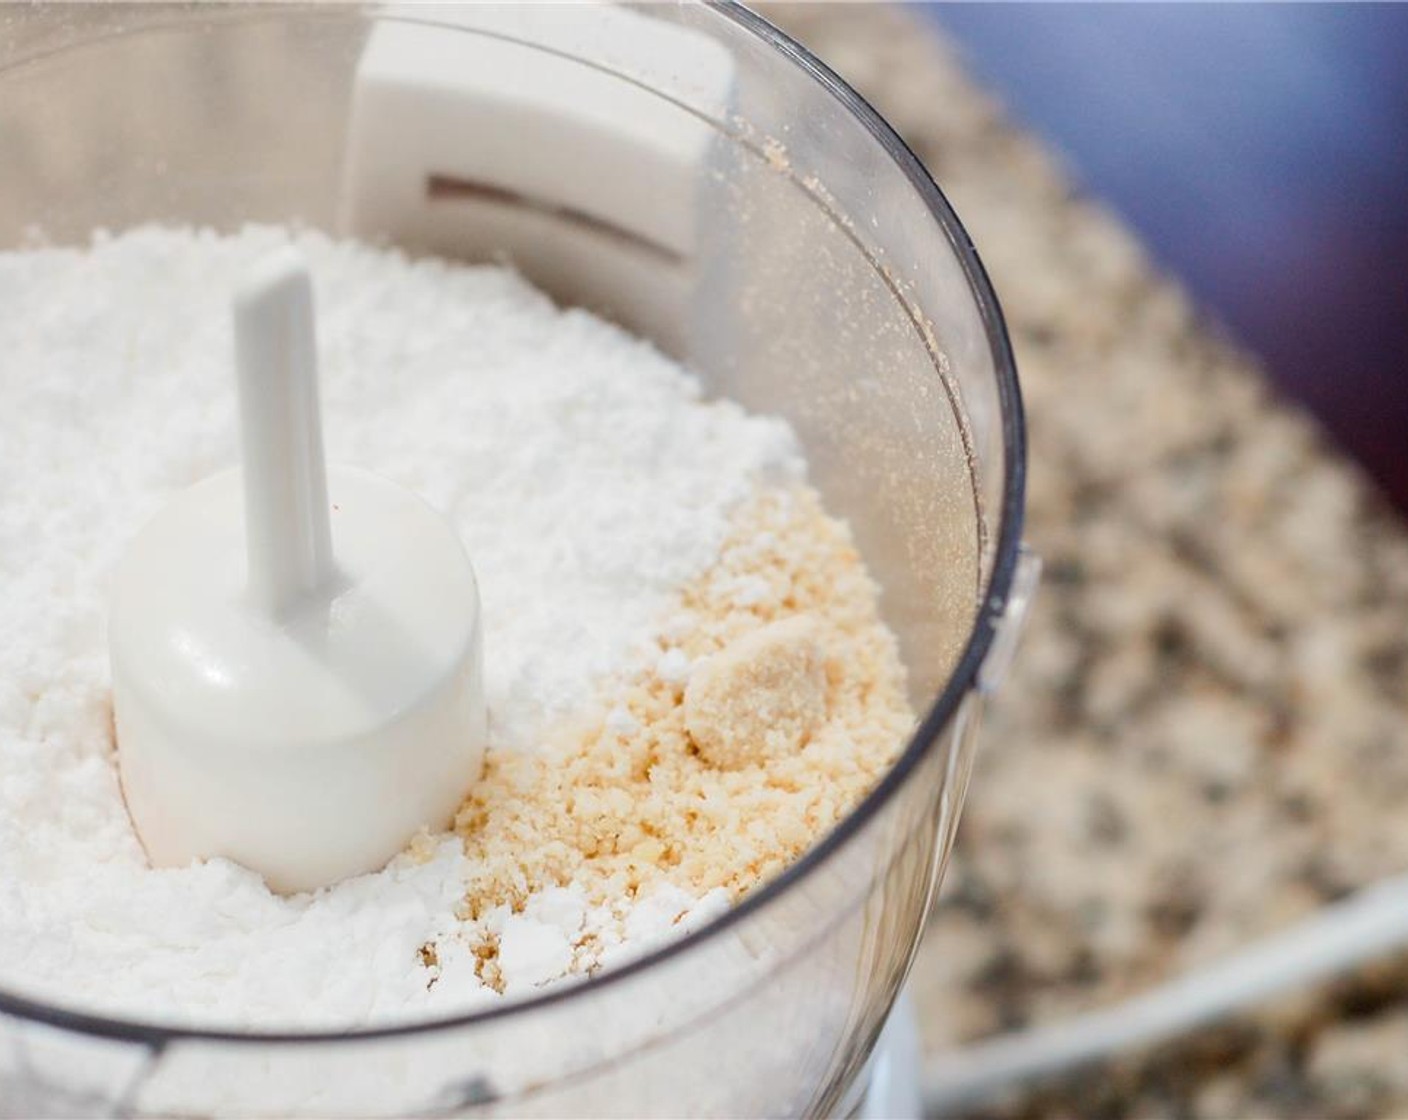 step 2 In a food processor, pulse 1/3 of the Powdered Confectioners Sugar (1 3/4 cups) and all the Almond Flour (1 cup) to form a fine powder. Then sift sugar mixture 2 times.